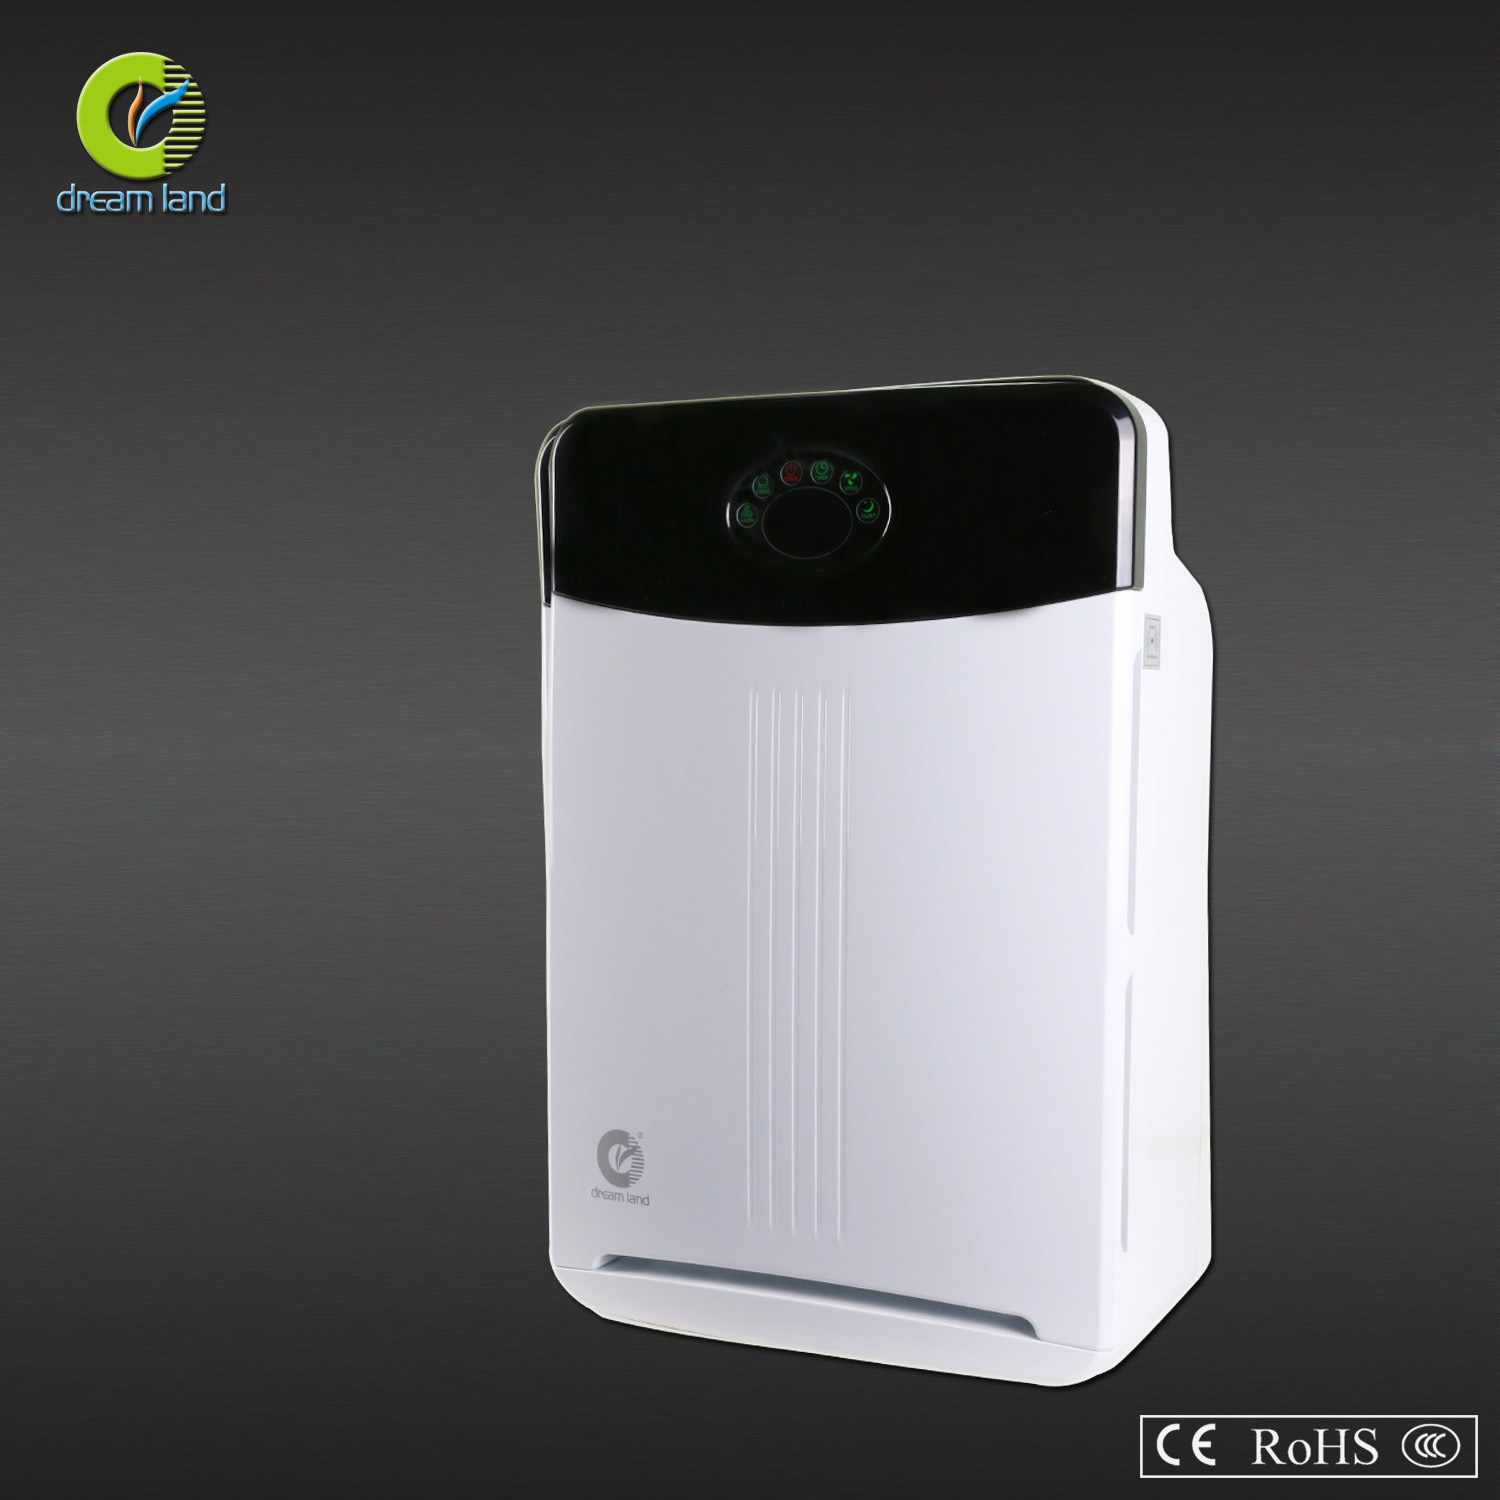 Customized Air Purifier of Different Colors (CLA-08B)